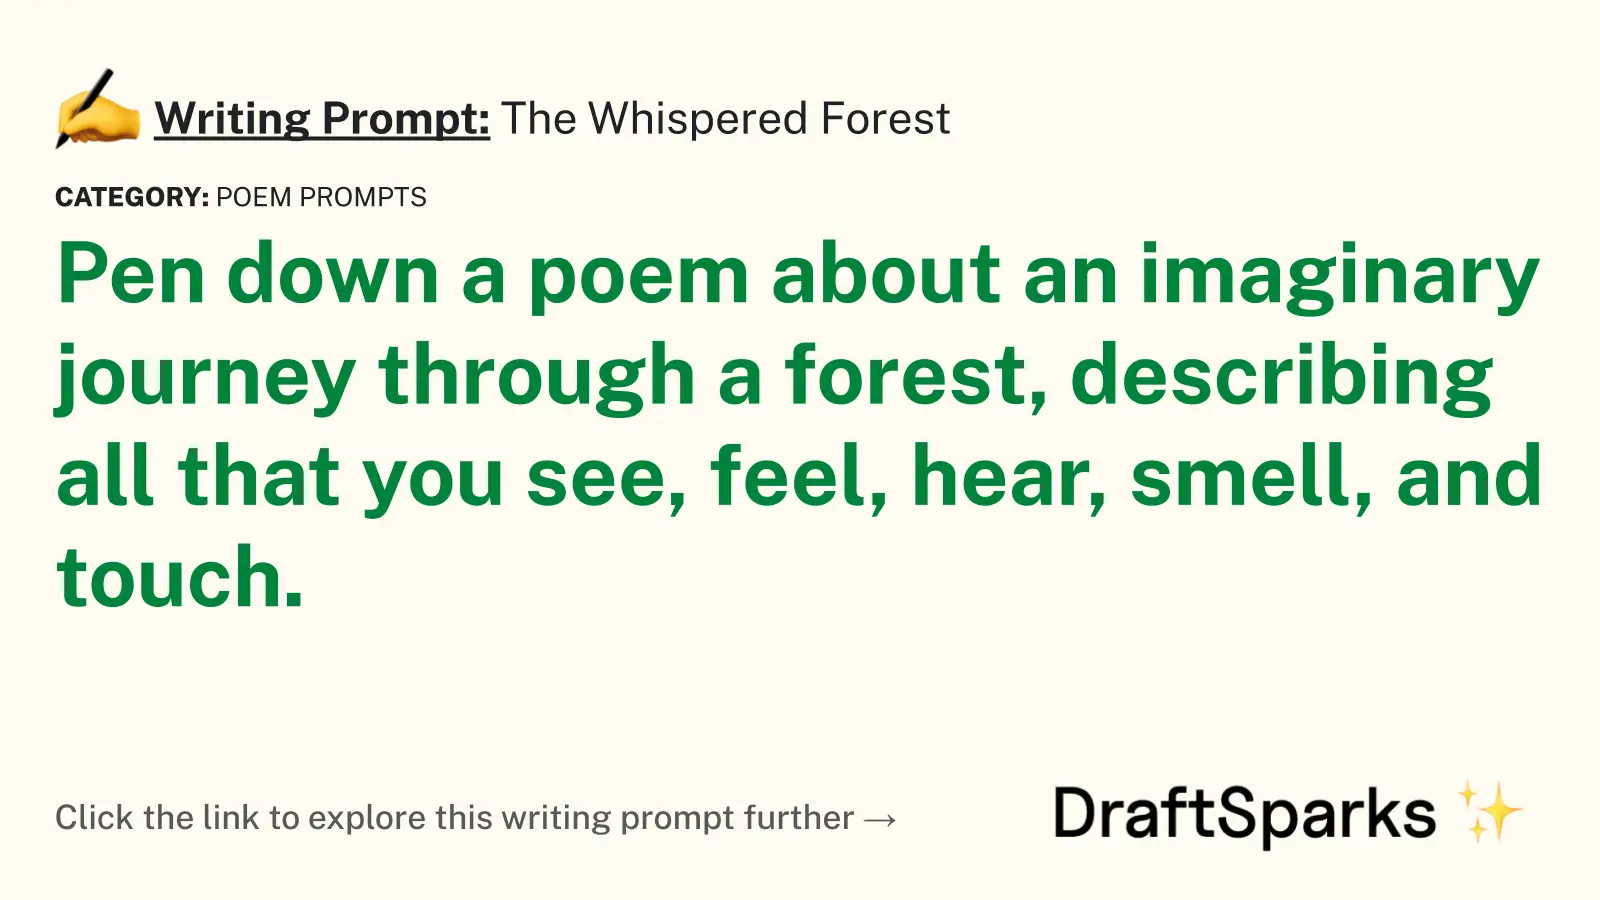 The Whispered Forest